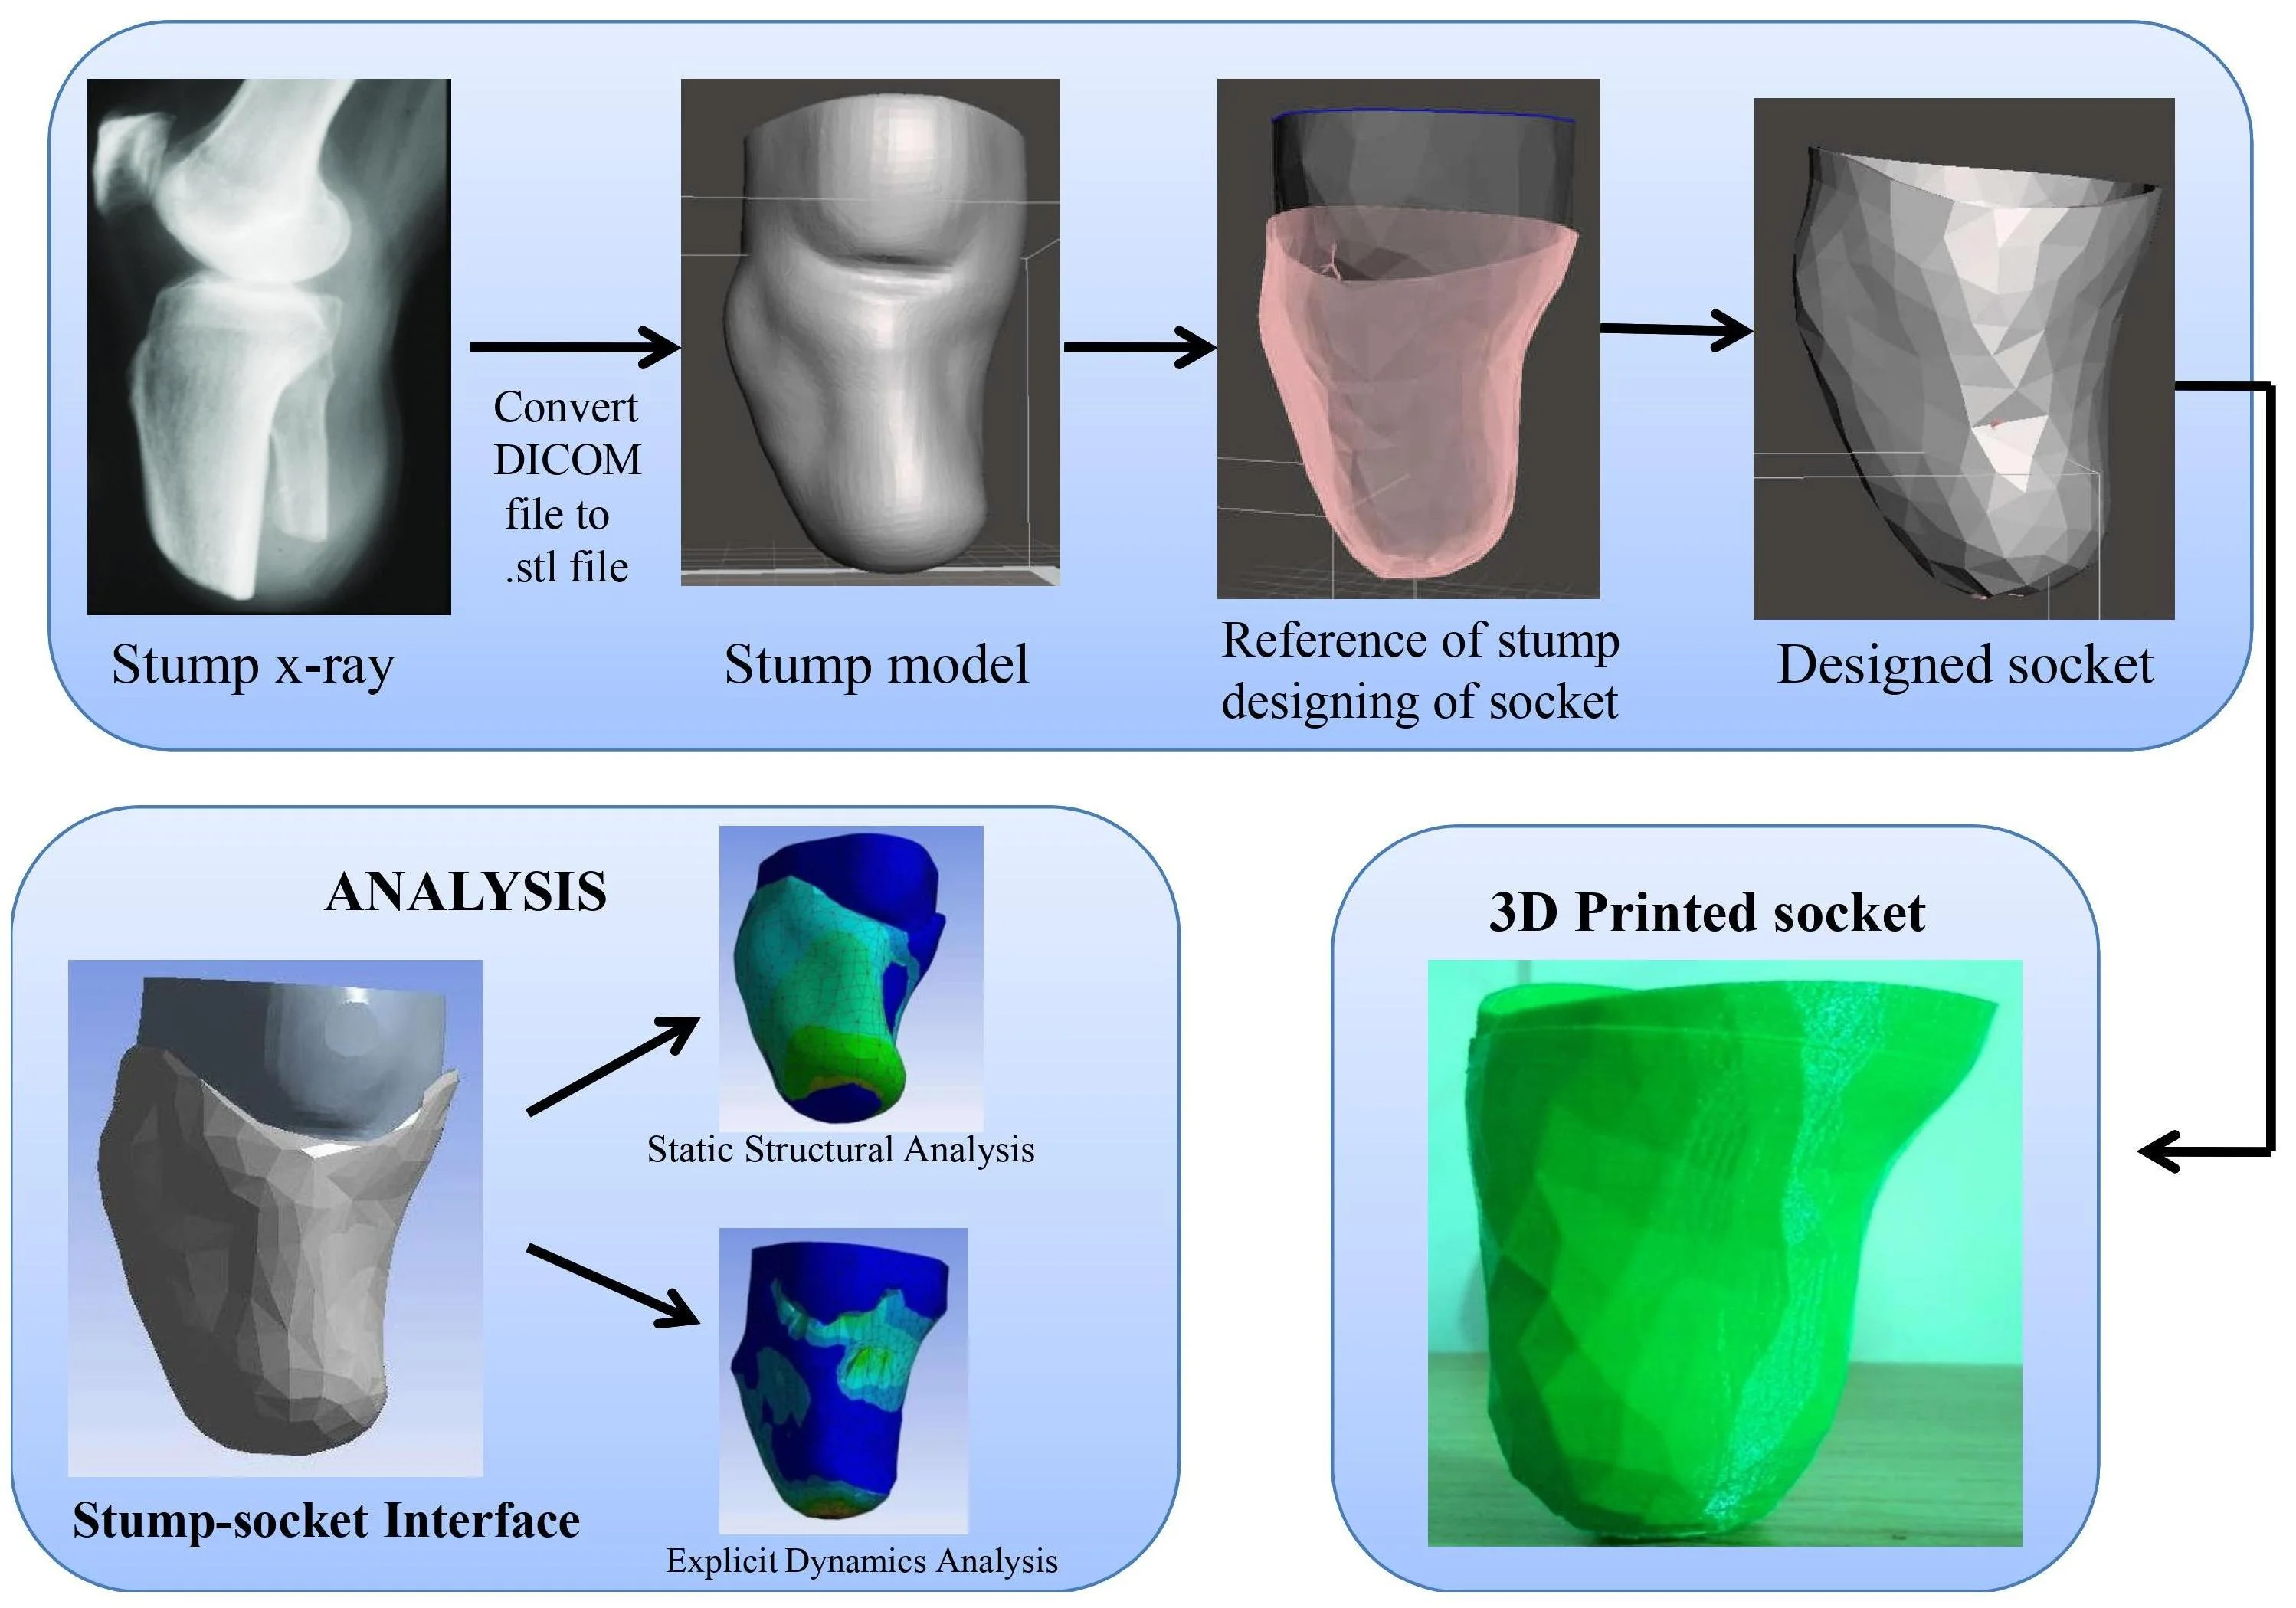 Design and development of patient-specific prosthetic socket for lower limb amputation